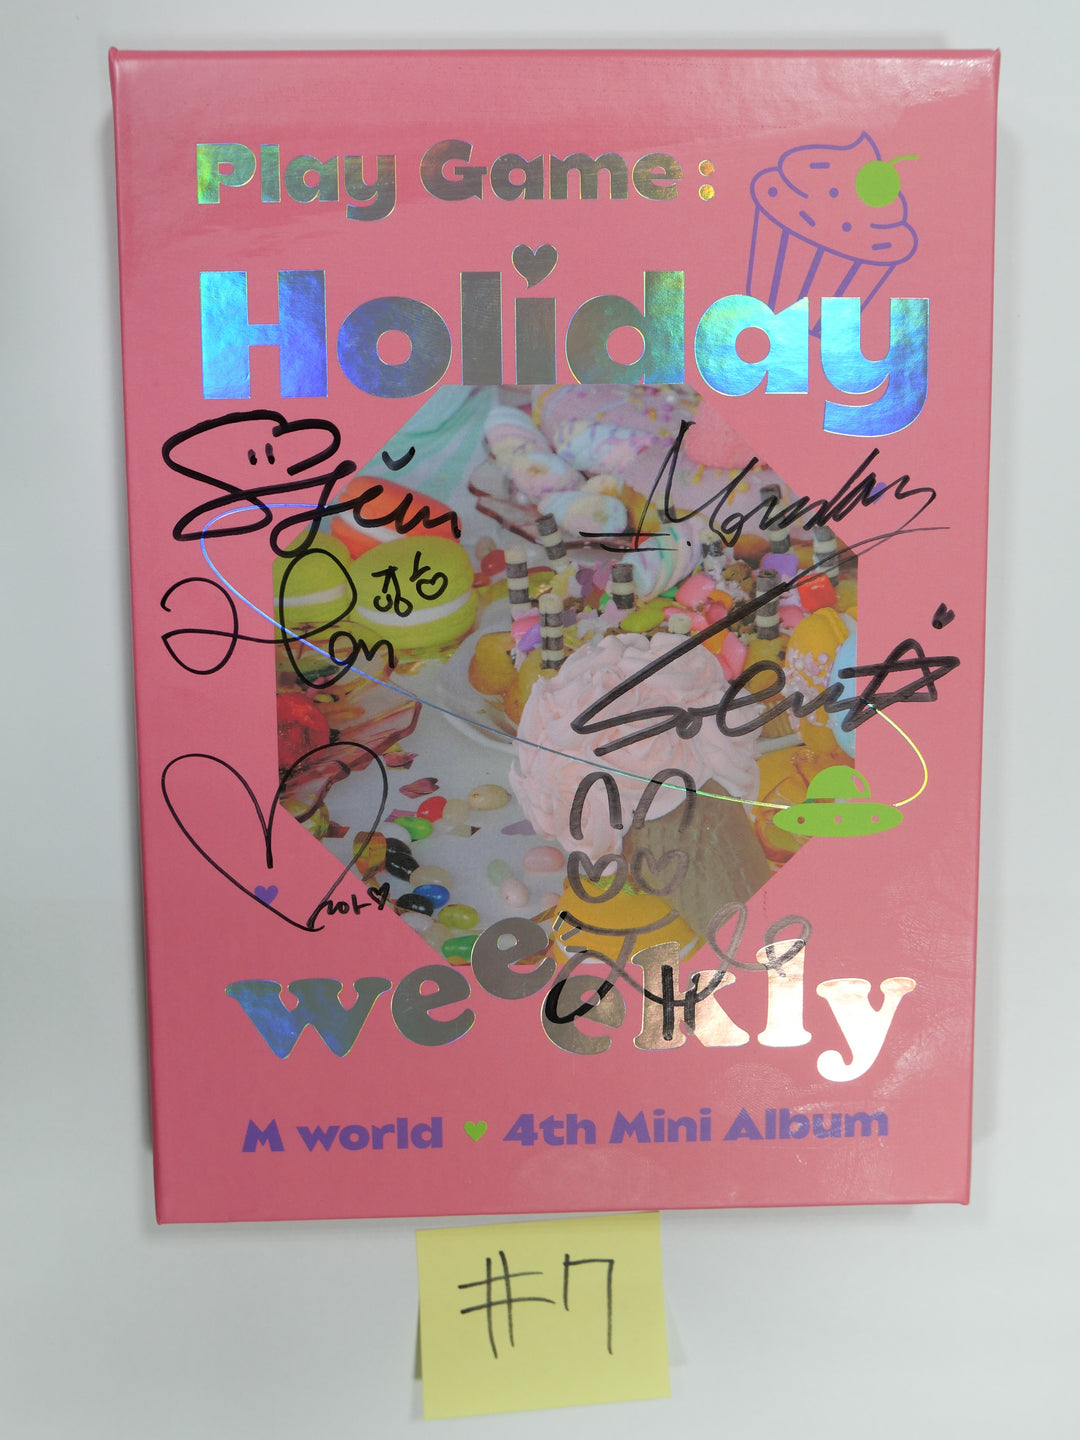 Weeekly "Play Game : Holiday Party" 4th Mini - Autographed Promo Album (Updated 8/12)